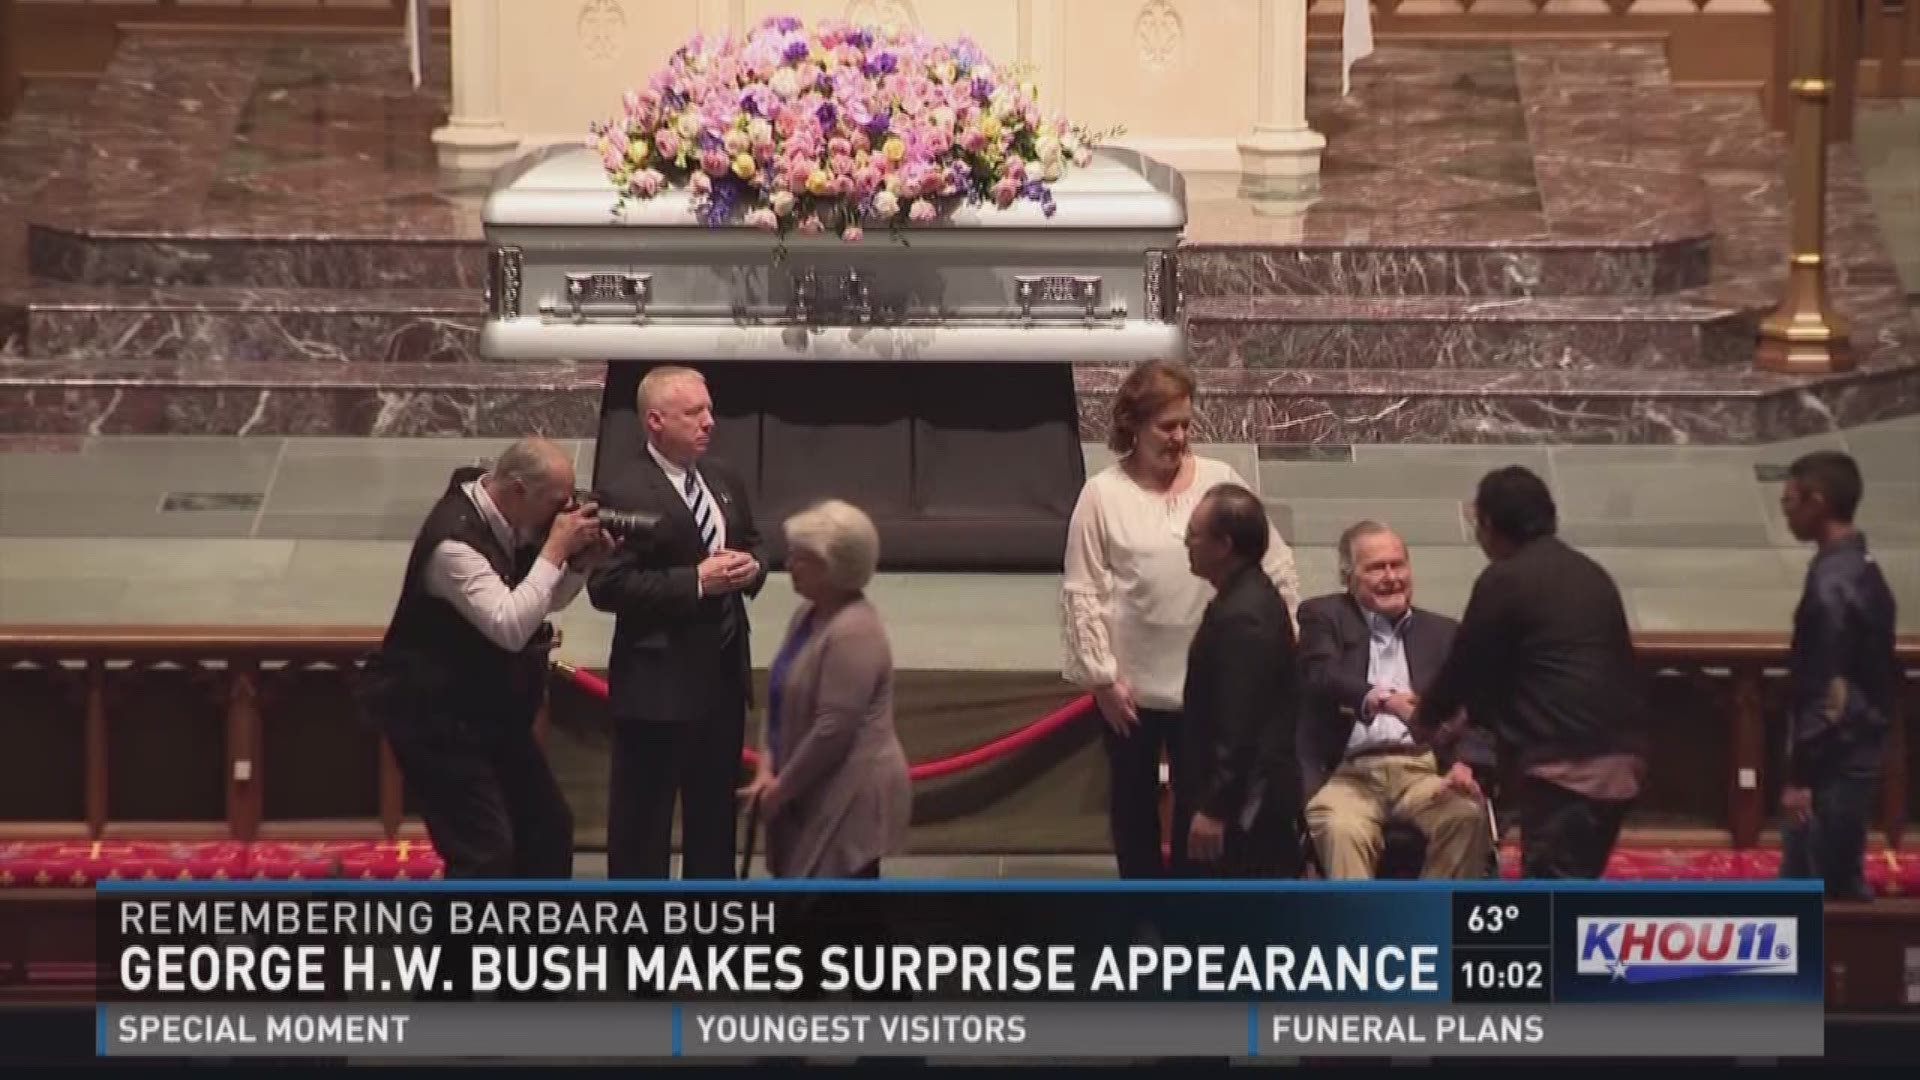 Thousands of people paid their respects at a public visitation for the late former First Lady Barbara Bush on Friday.